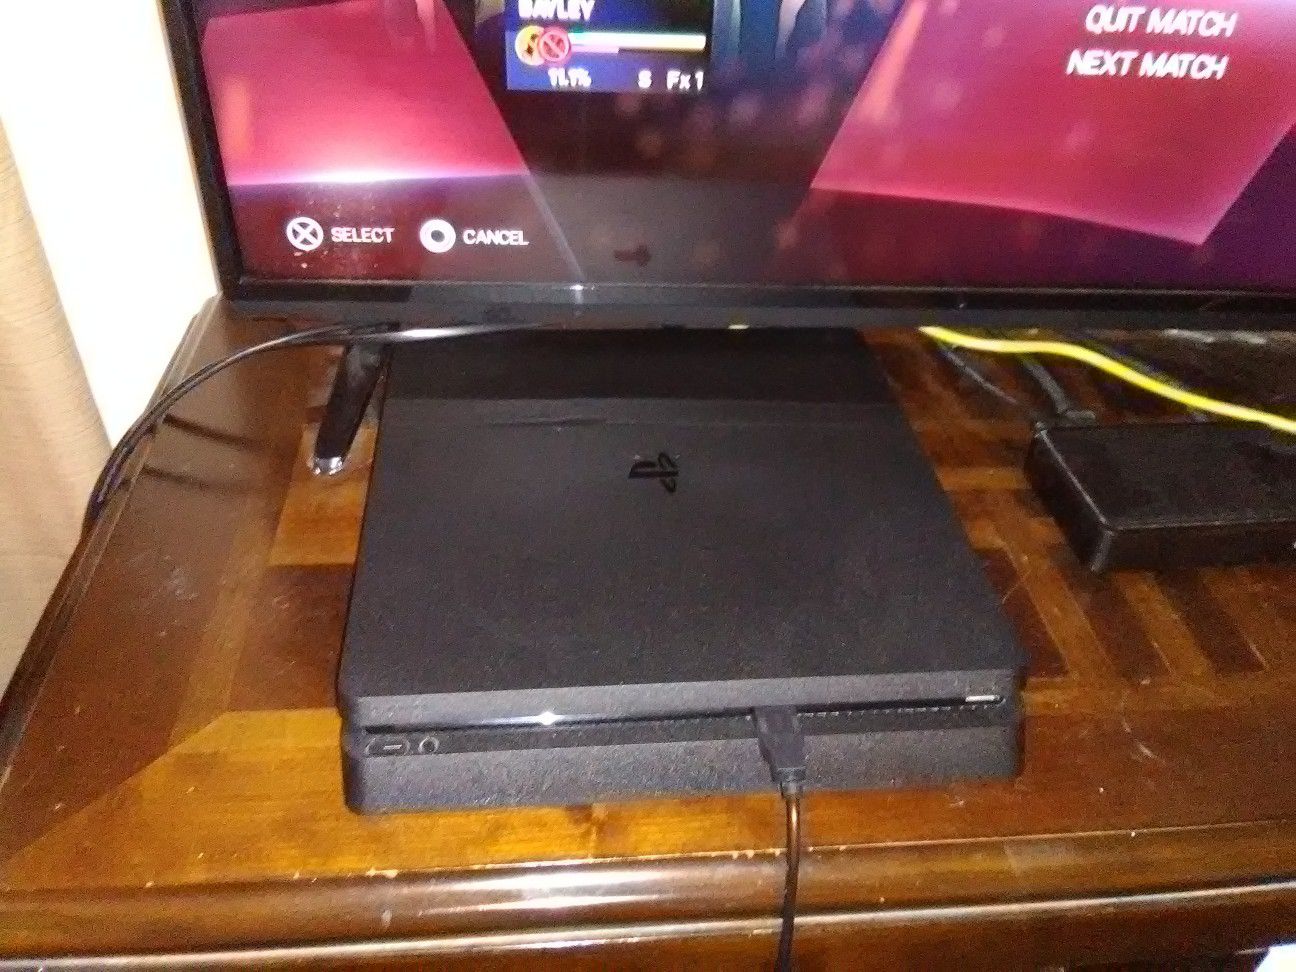 PS4 slim 1tb with a gold controller